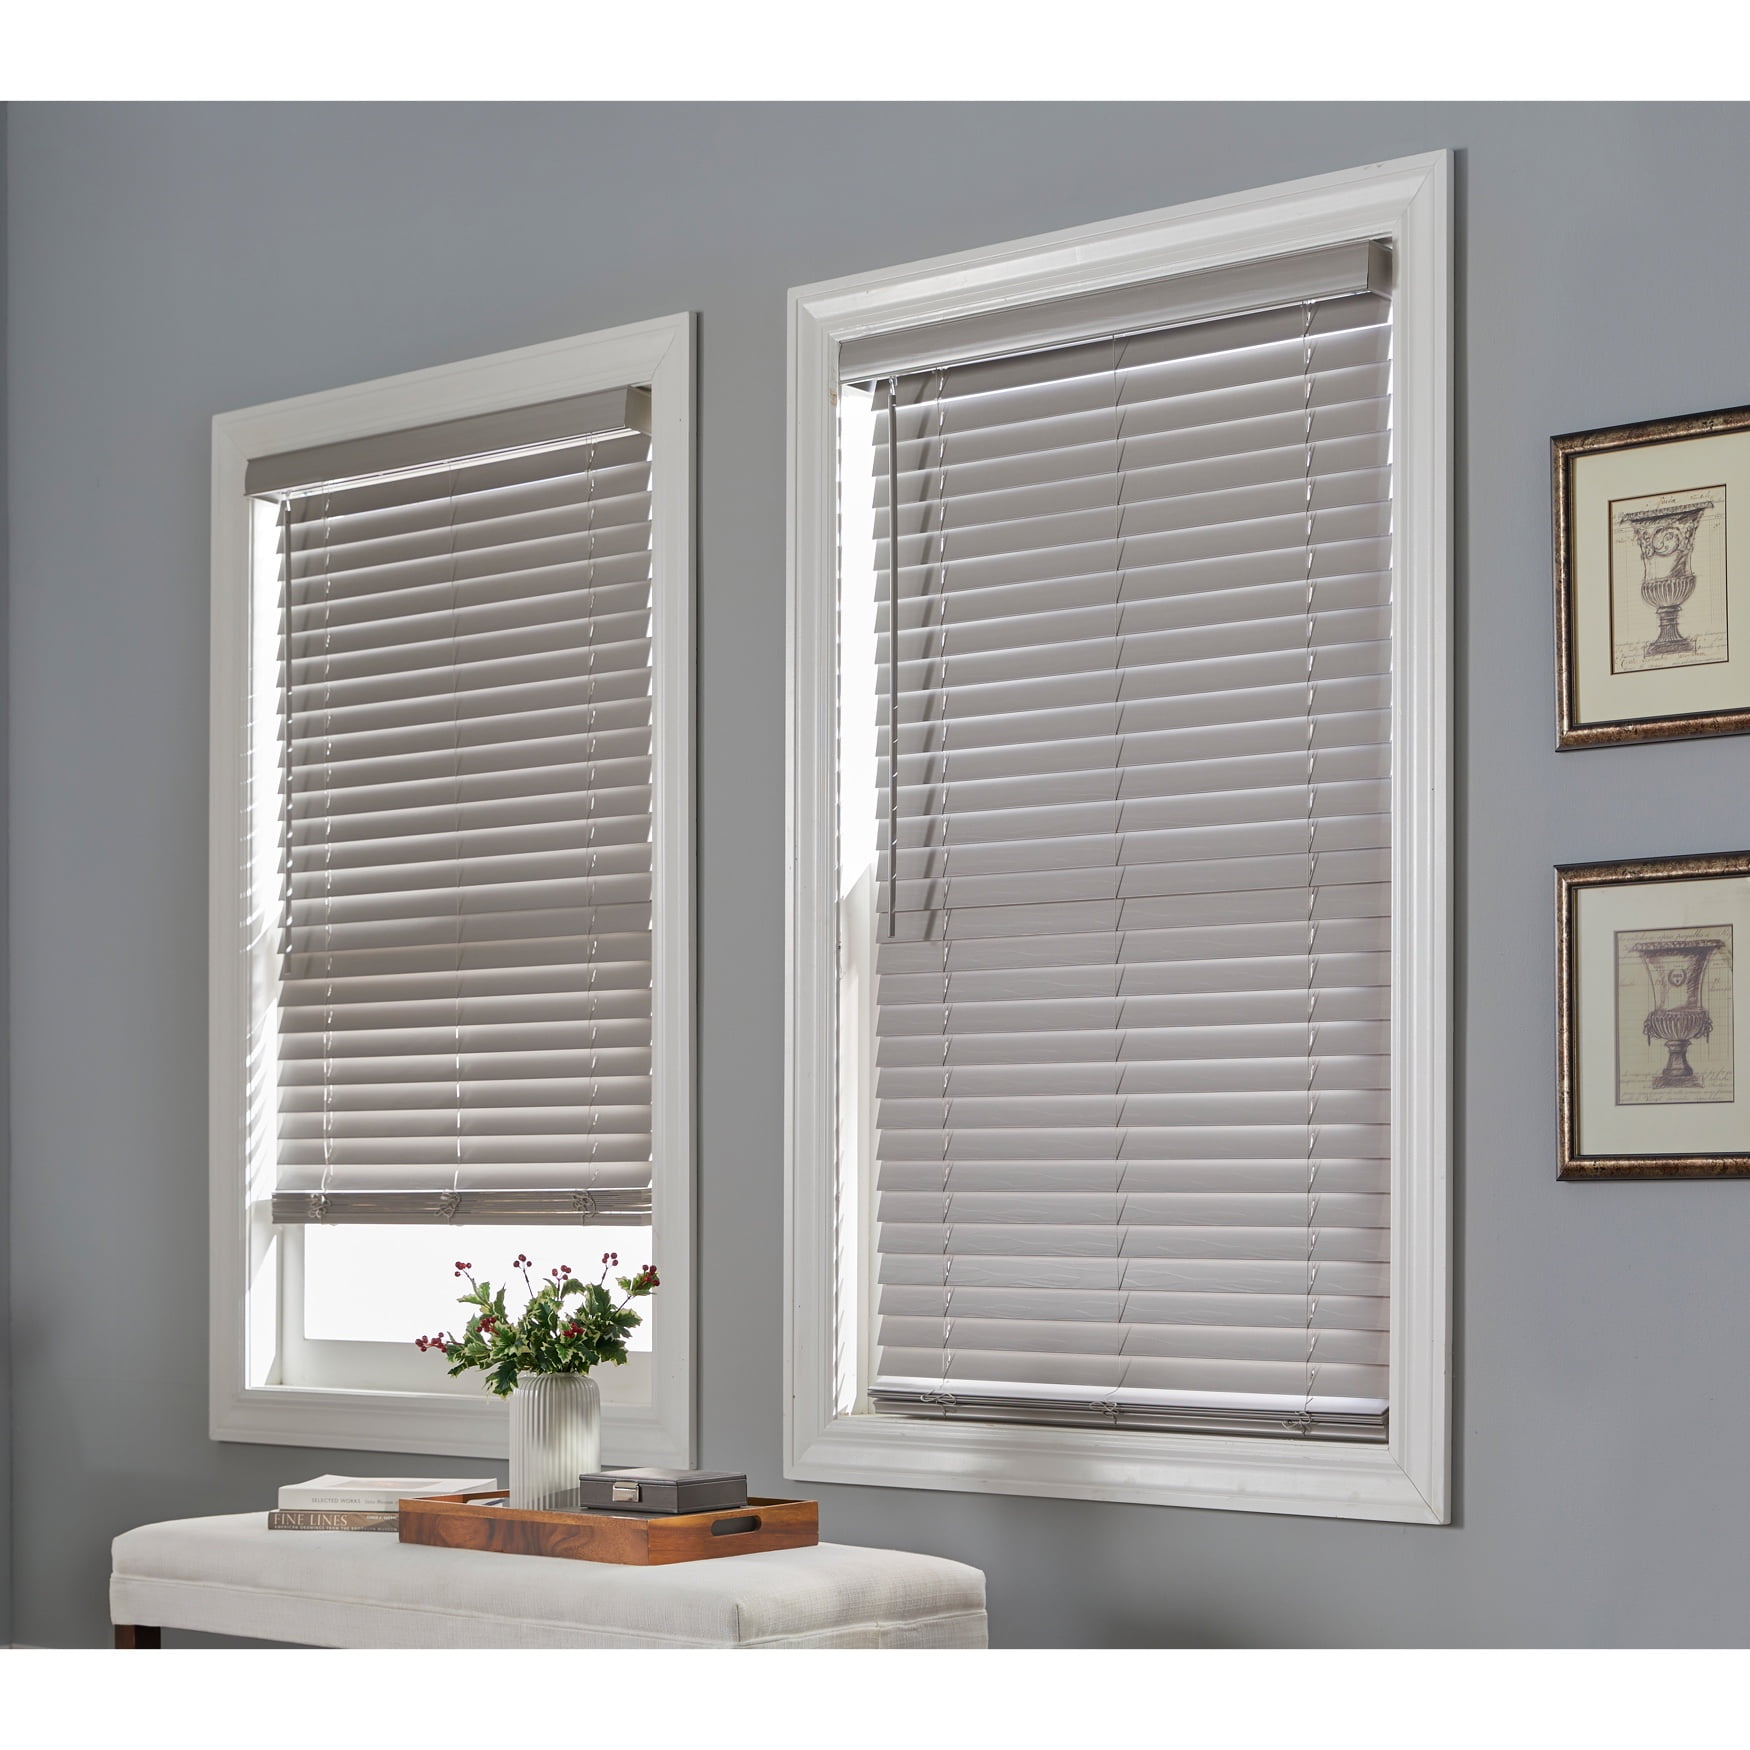 2" Cordless Faux Wood Blinds Rustic Gray DIF SIZES Horizontal Window Shades Tint 